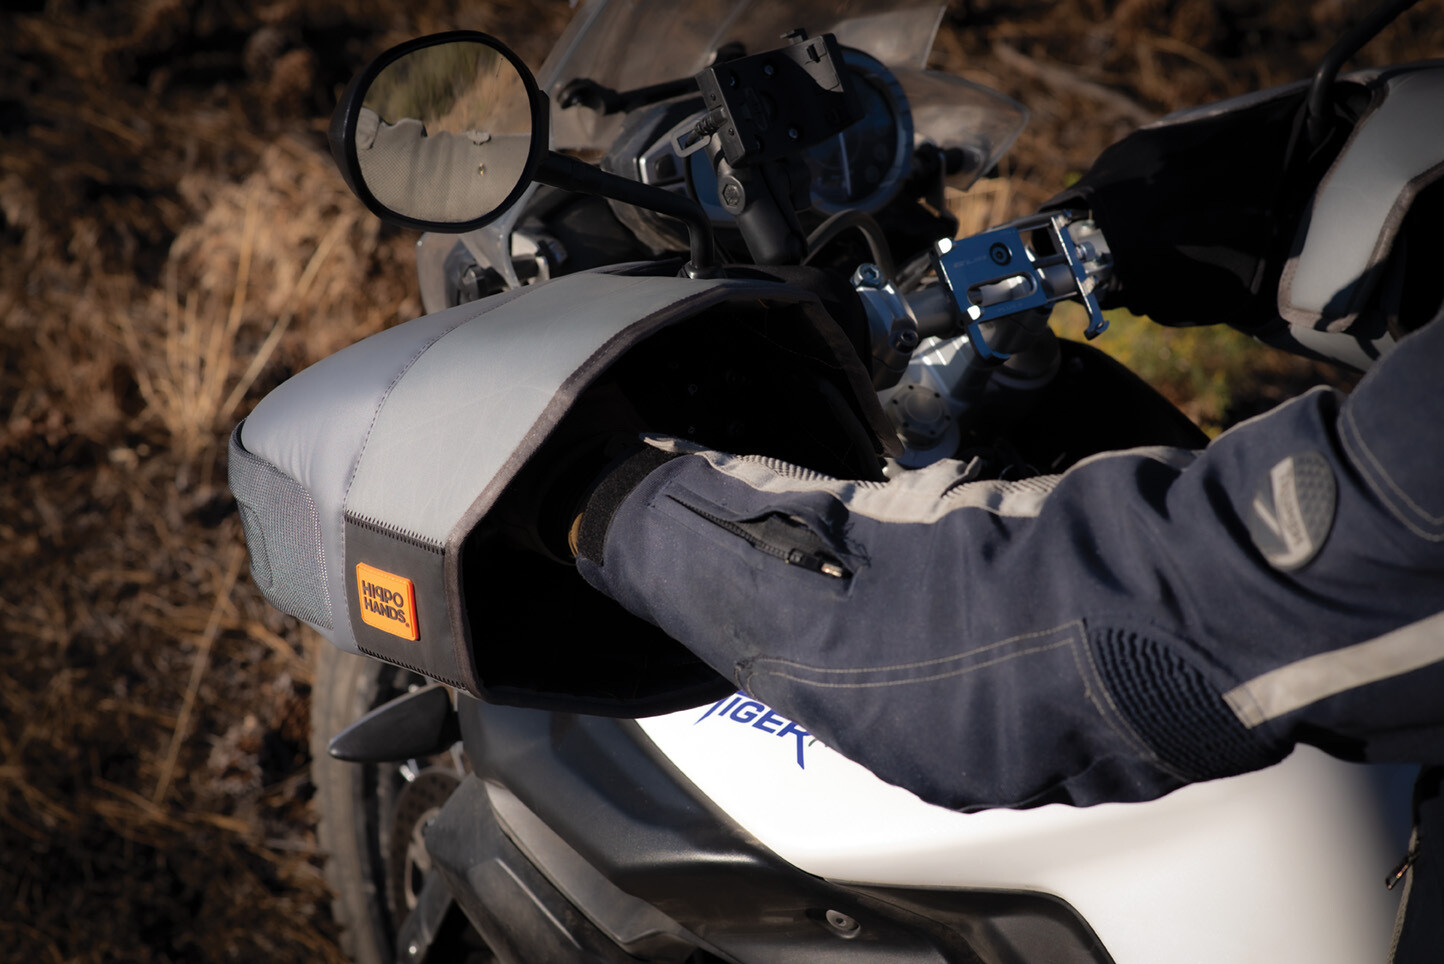 Hippo Hands Rogue — Mid-Sized, Versatile Motorcycle Hand Covers